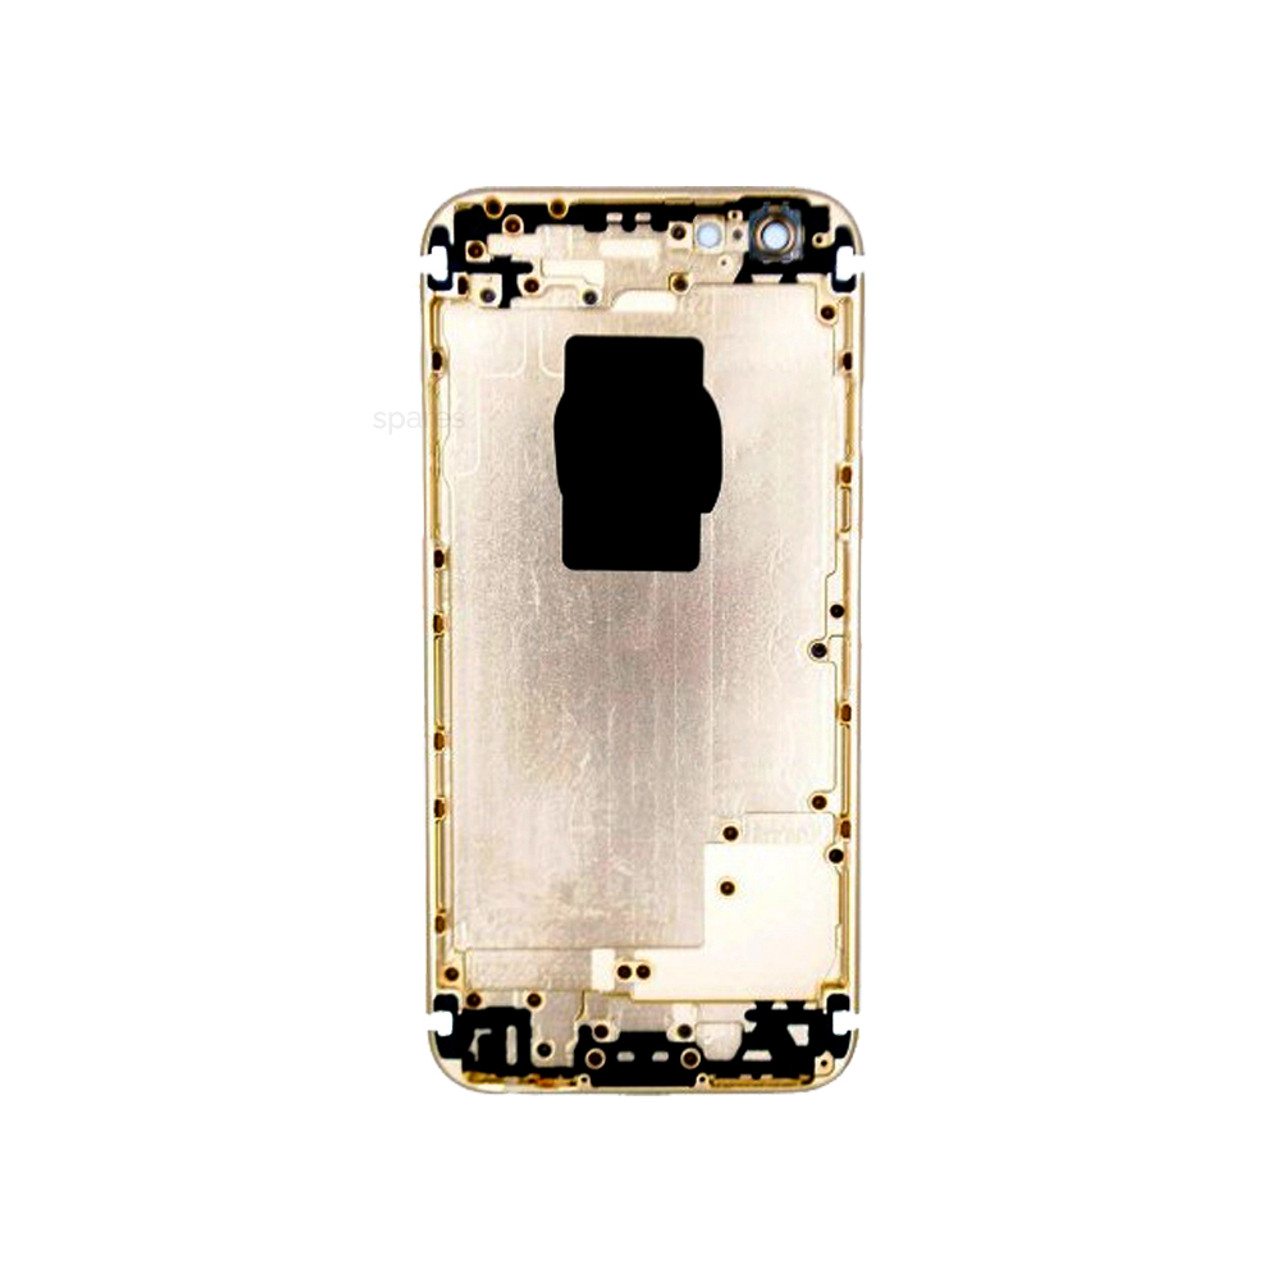 iPhone 6 Housing Chassis With Parts Gold Replacement